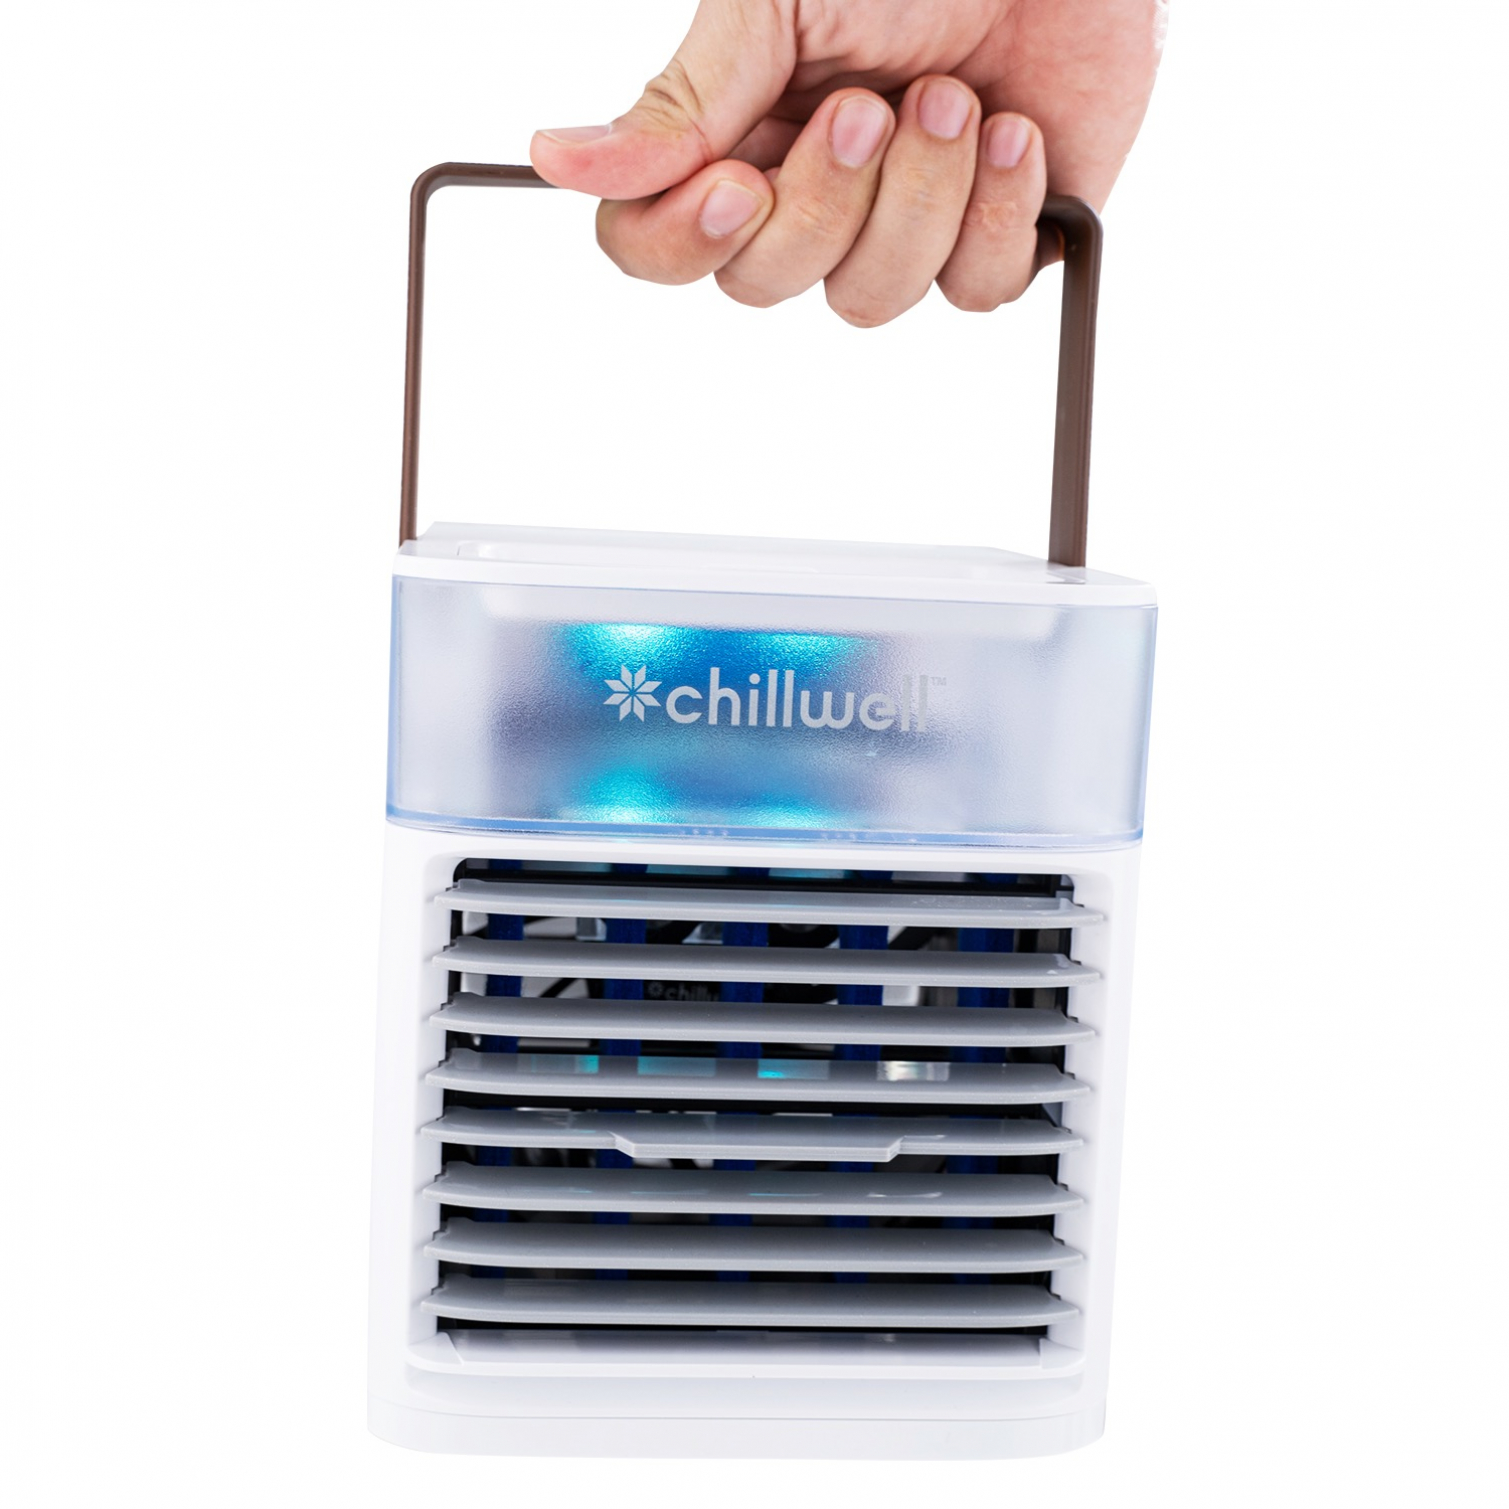 Chillwell AC As Seen On Tv Portable Evaporative Cooler